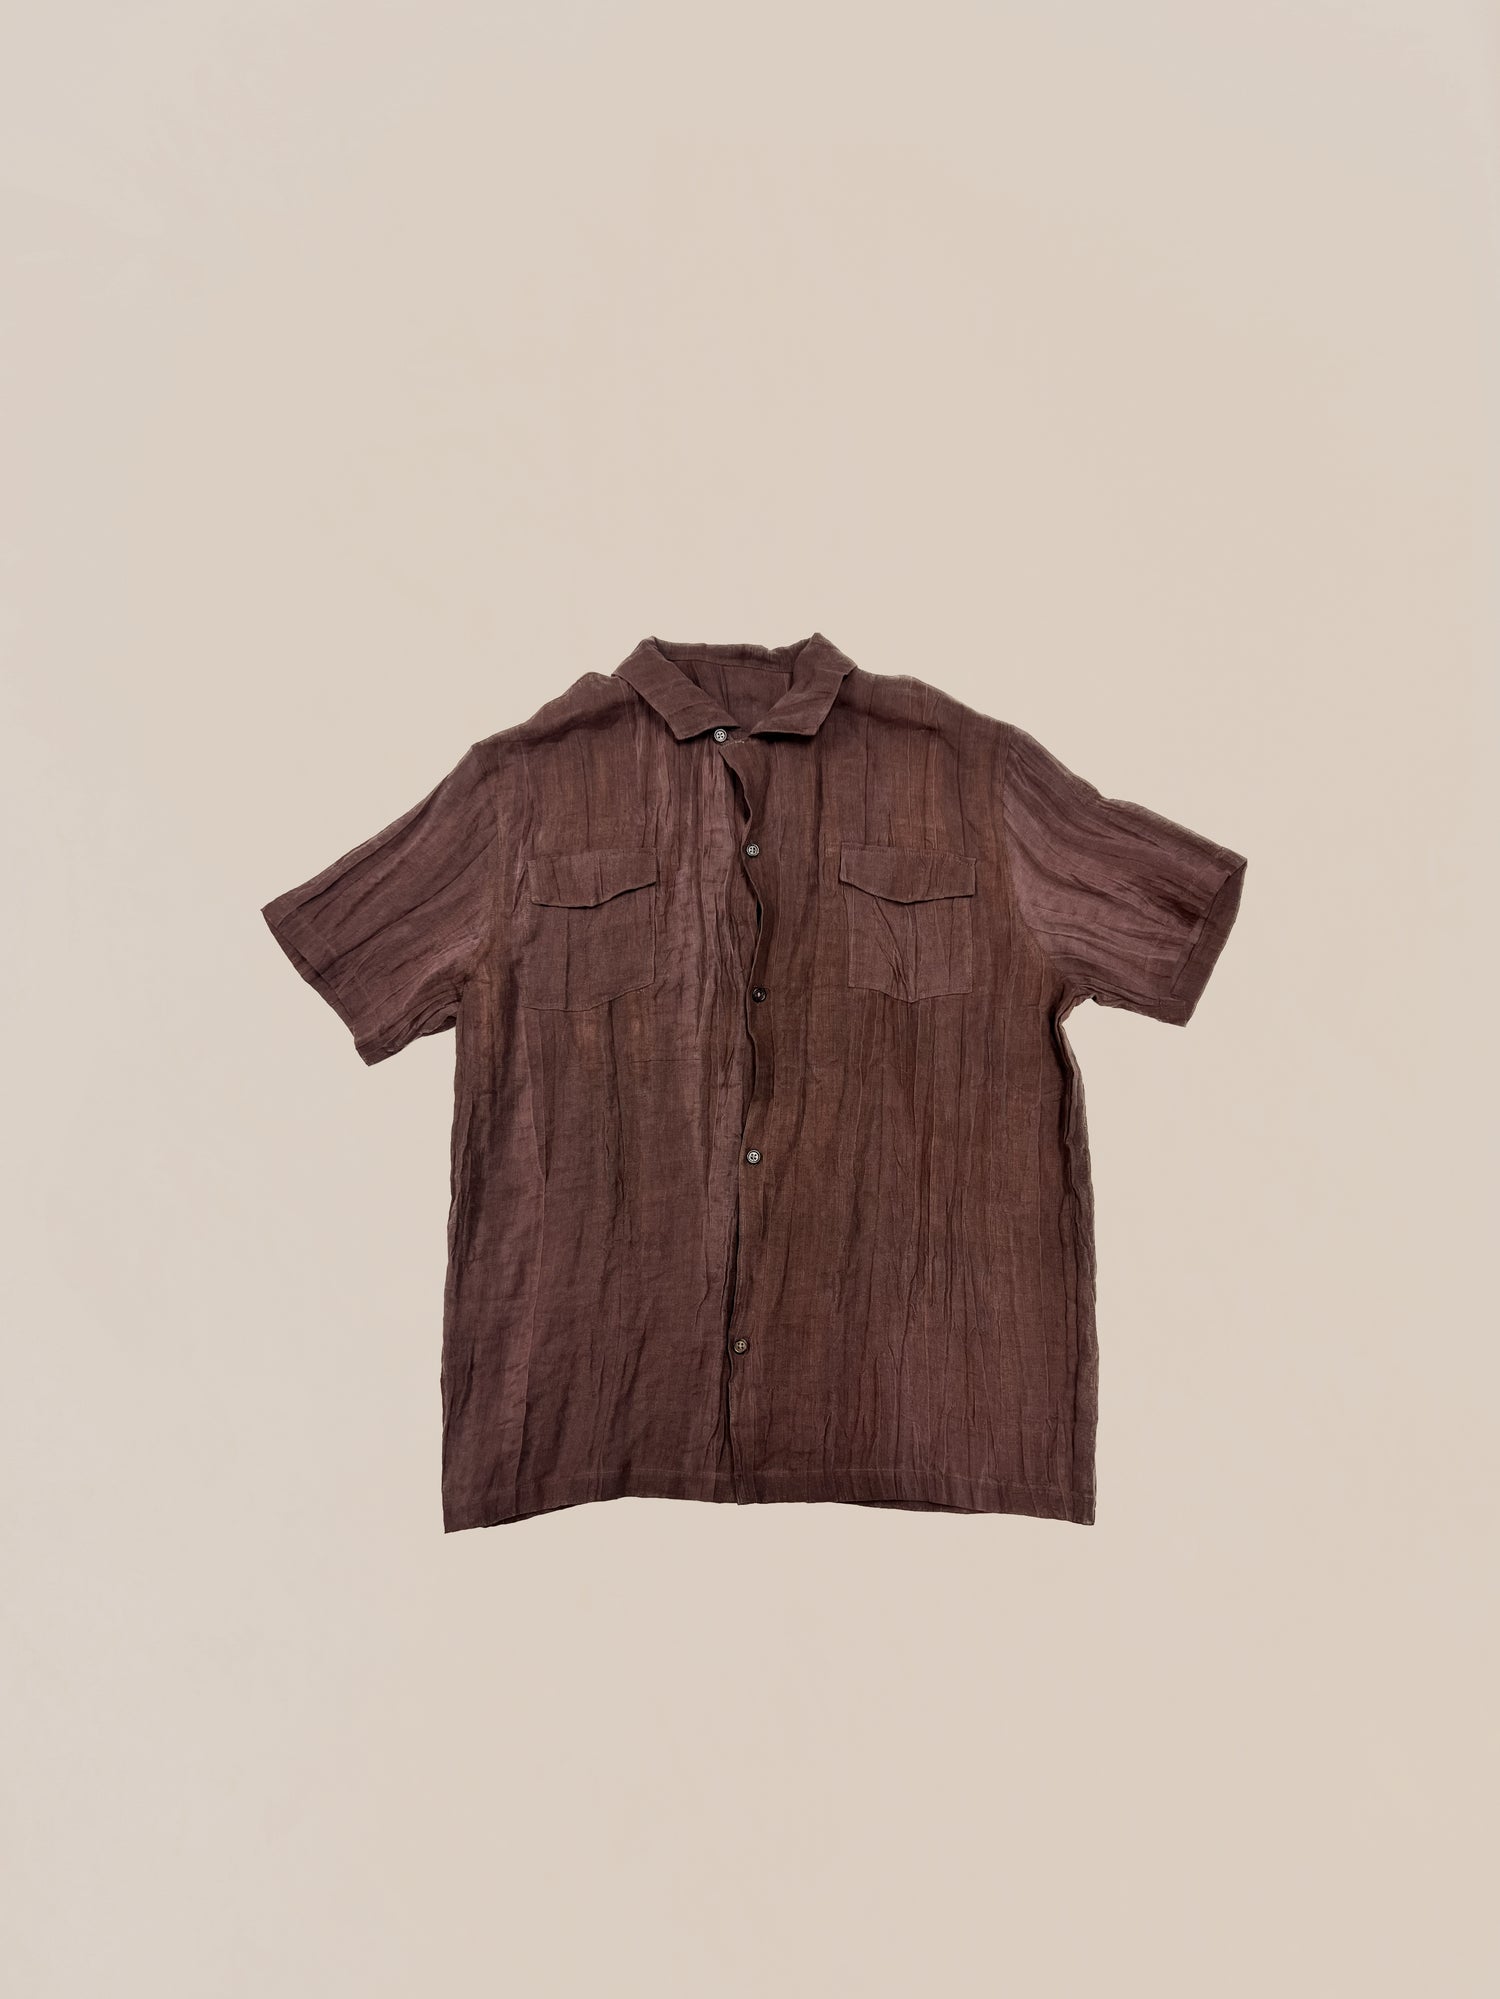 Sample 63 (Eggplant Camp Shirt) by Profound displayed on a neutral background.